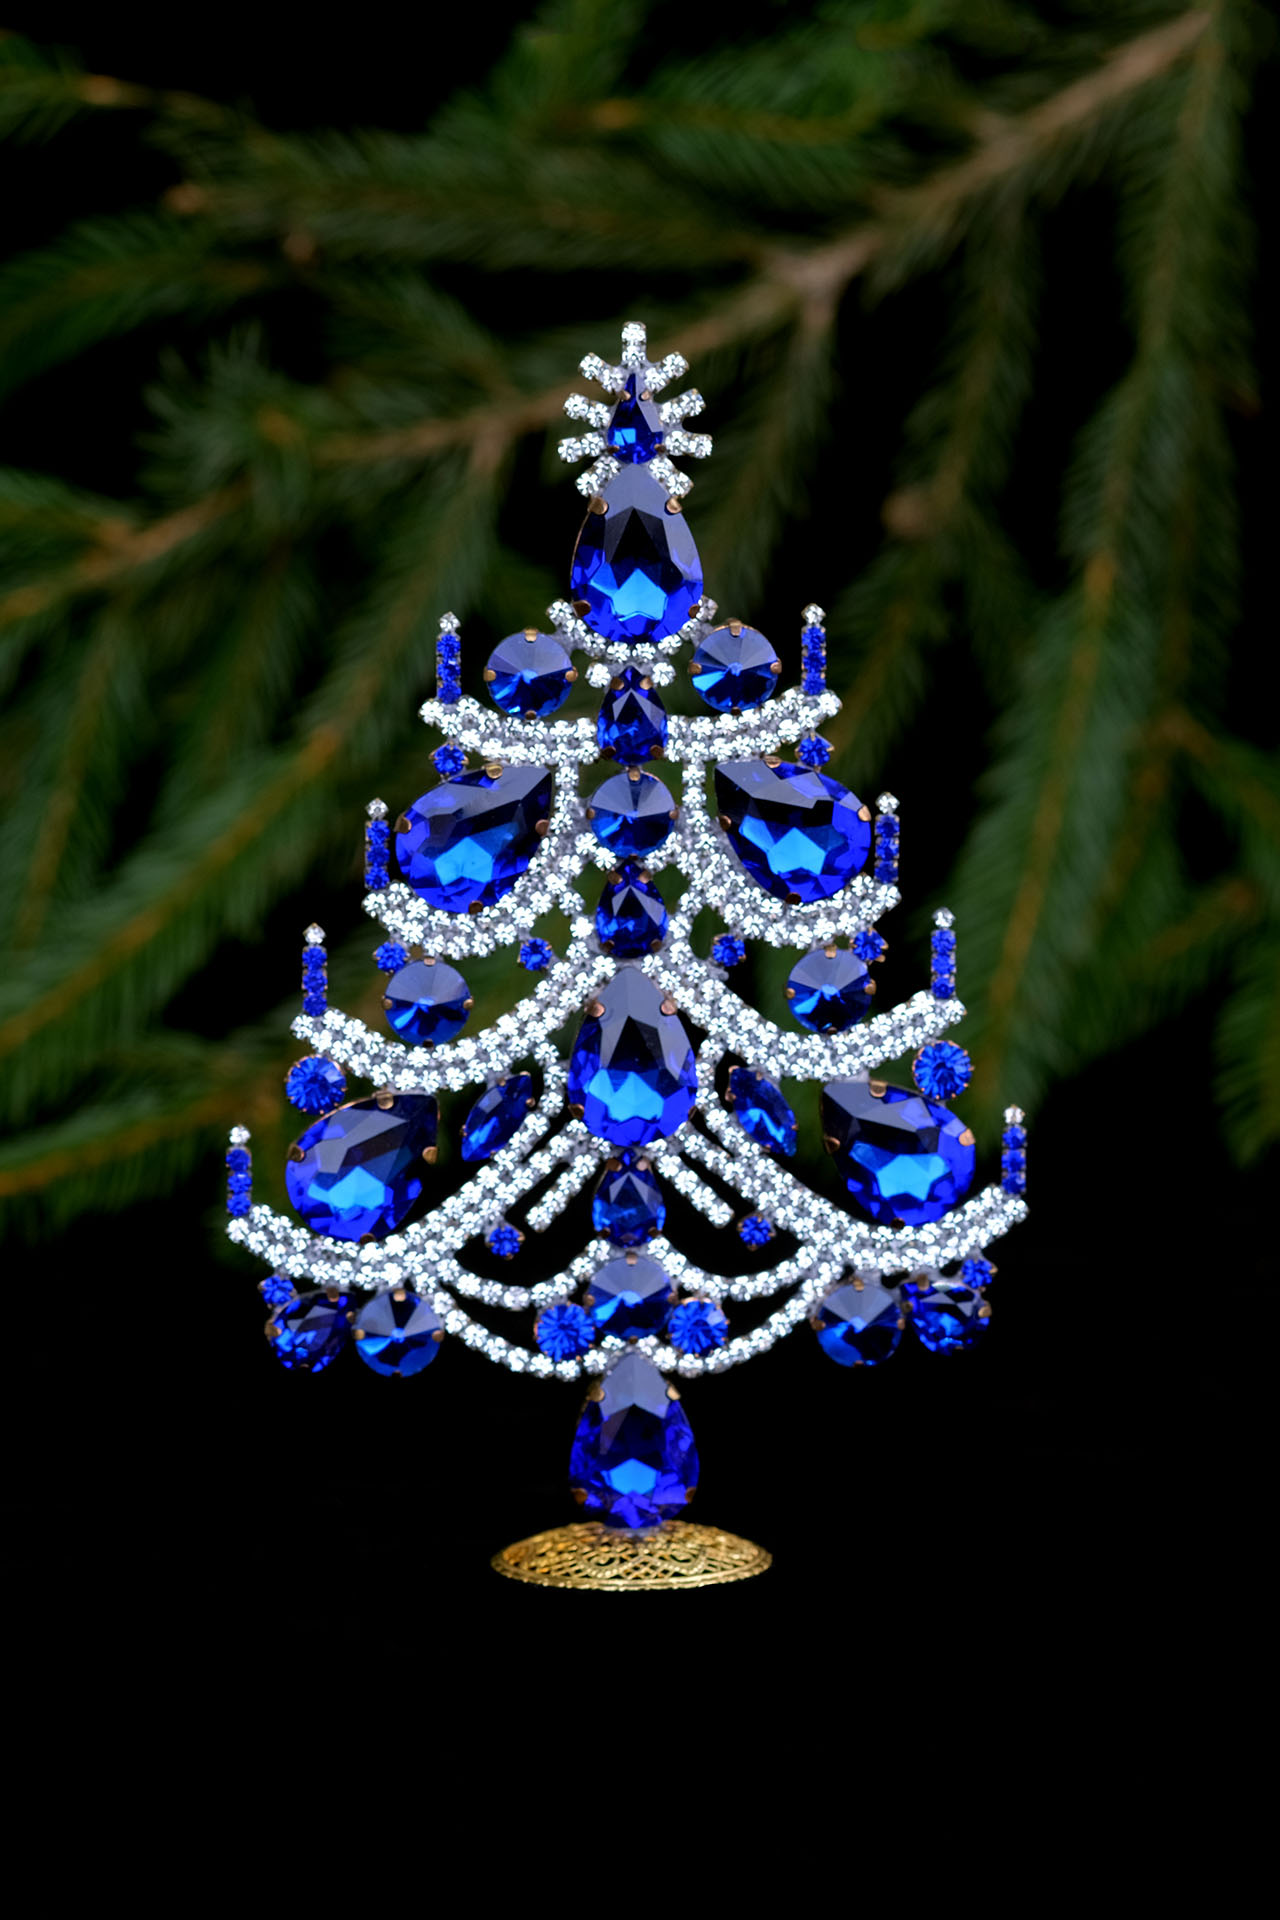 Charming handcrafted Xmas tree - with blue crystals ornaments